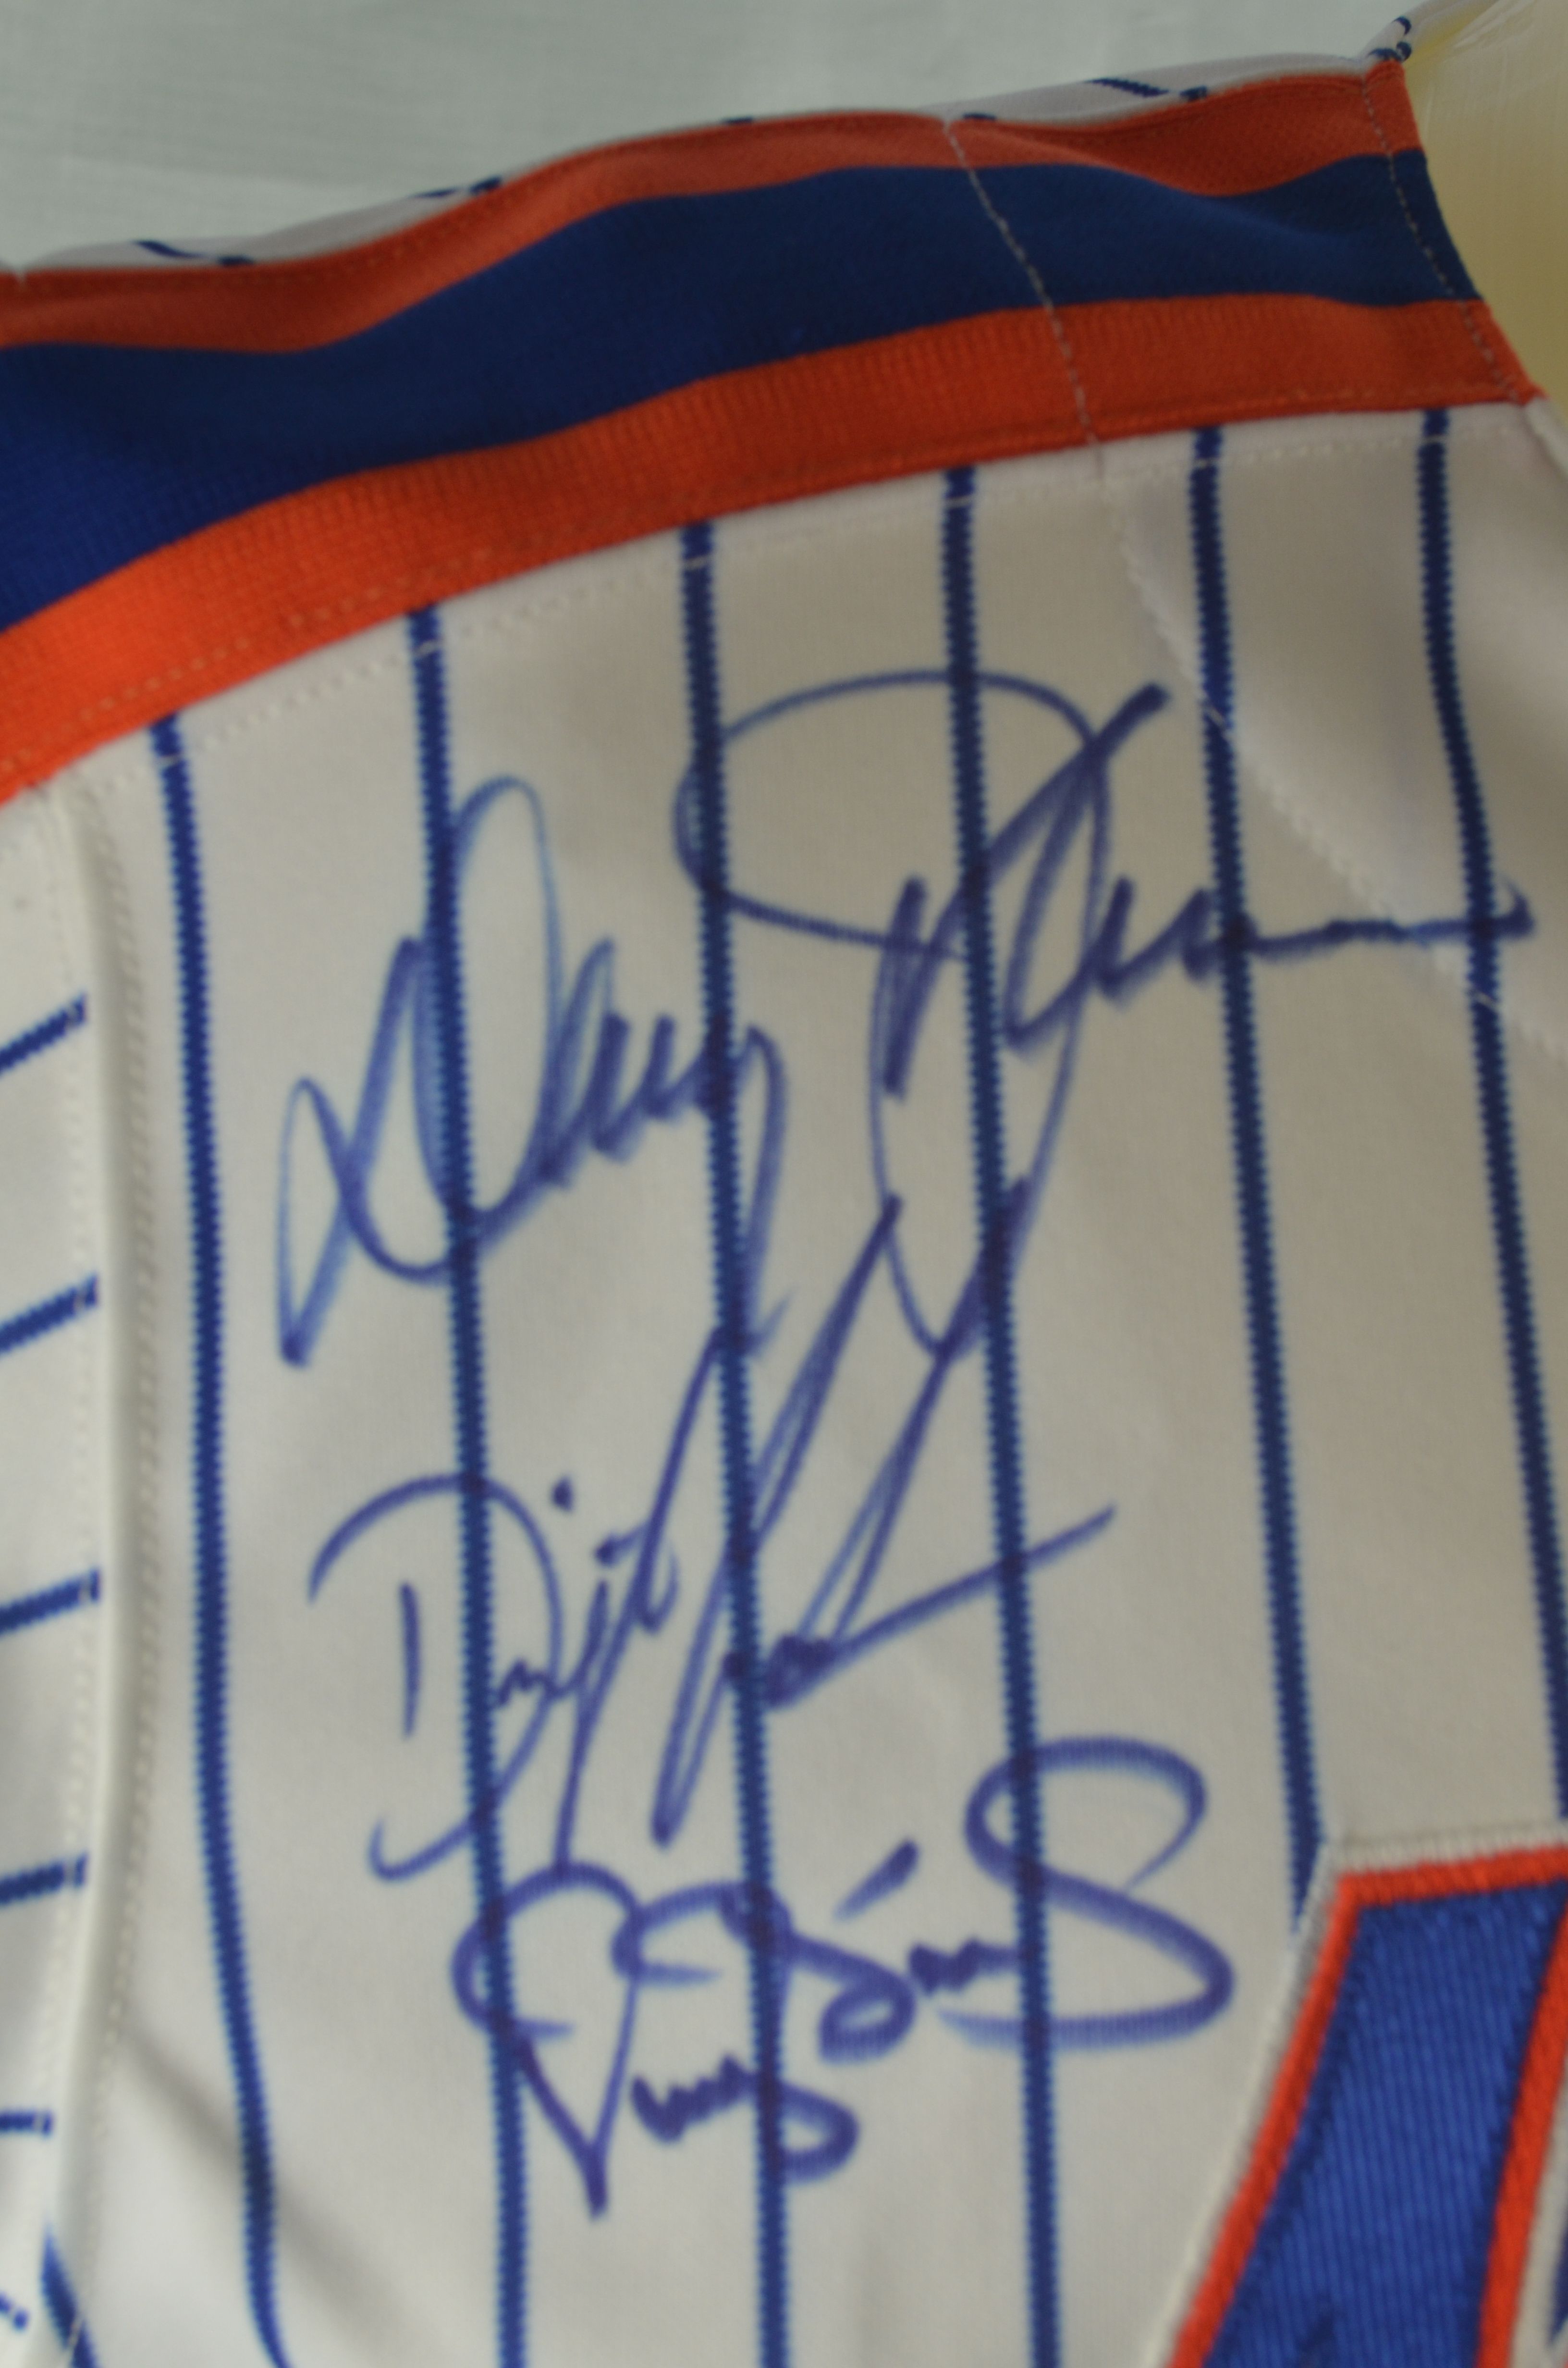 Lot Detail - 1986 World Champion New York Mets Team Signed Jersey With 26  Signatures Including Carter, Knight & Gooden (PSA/DNA)